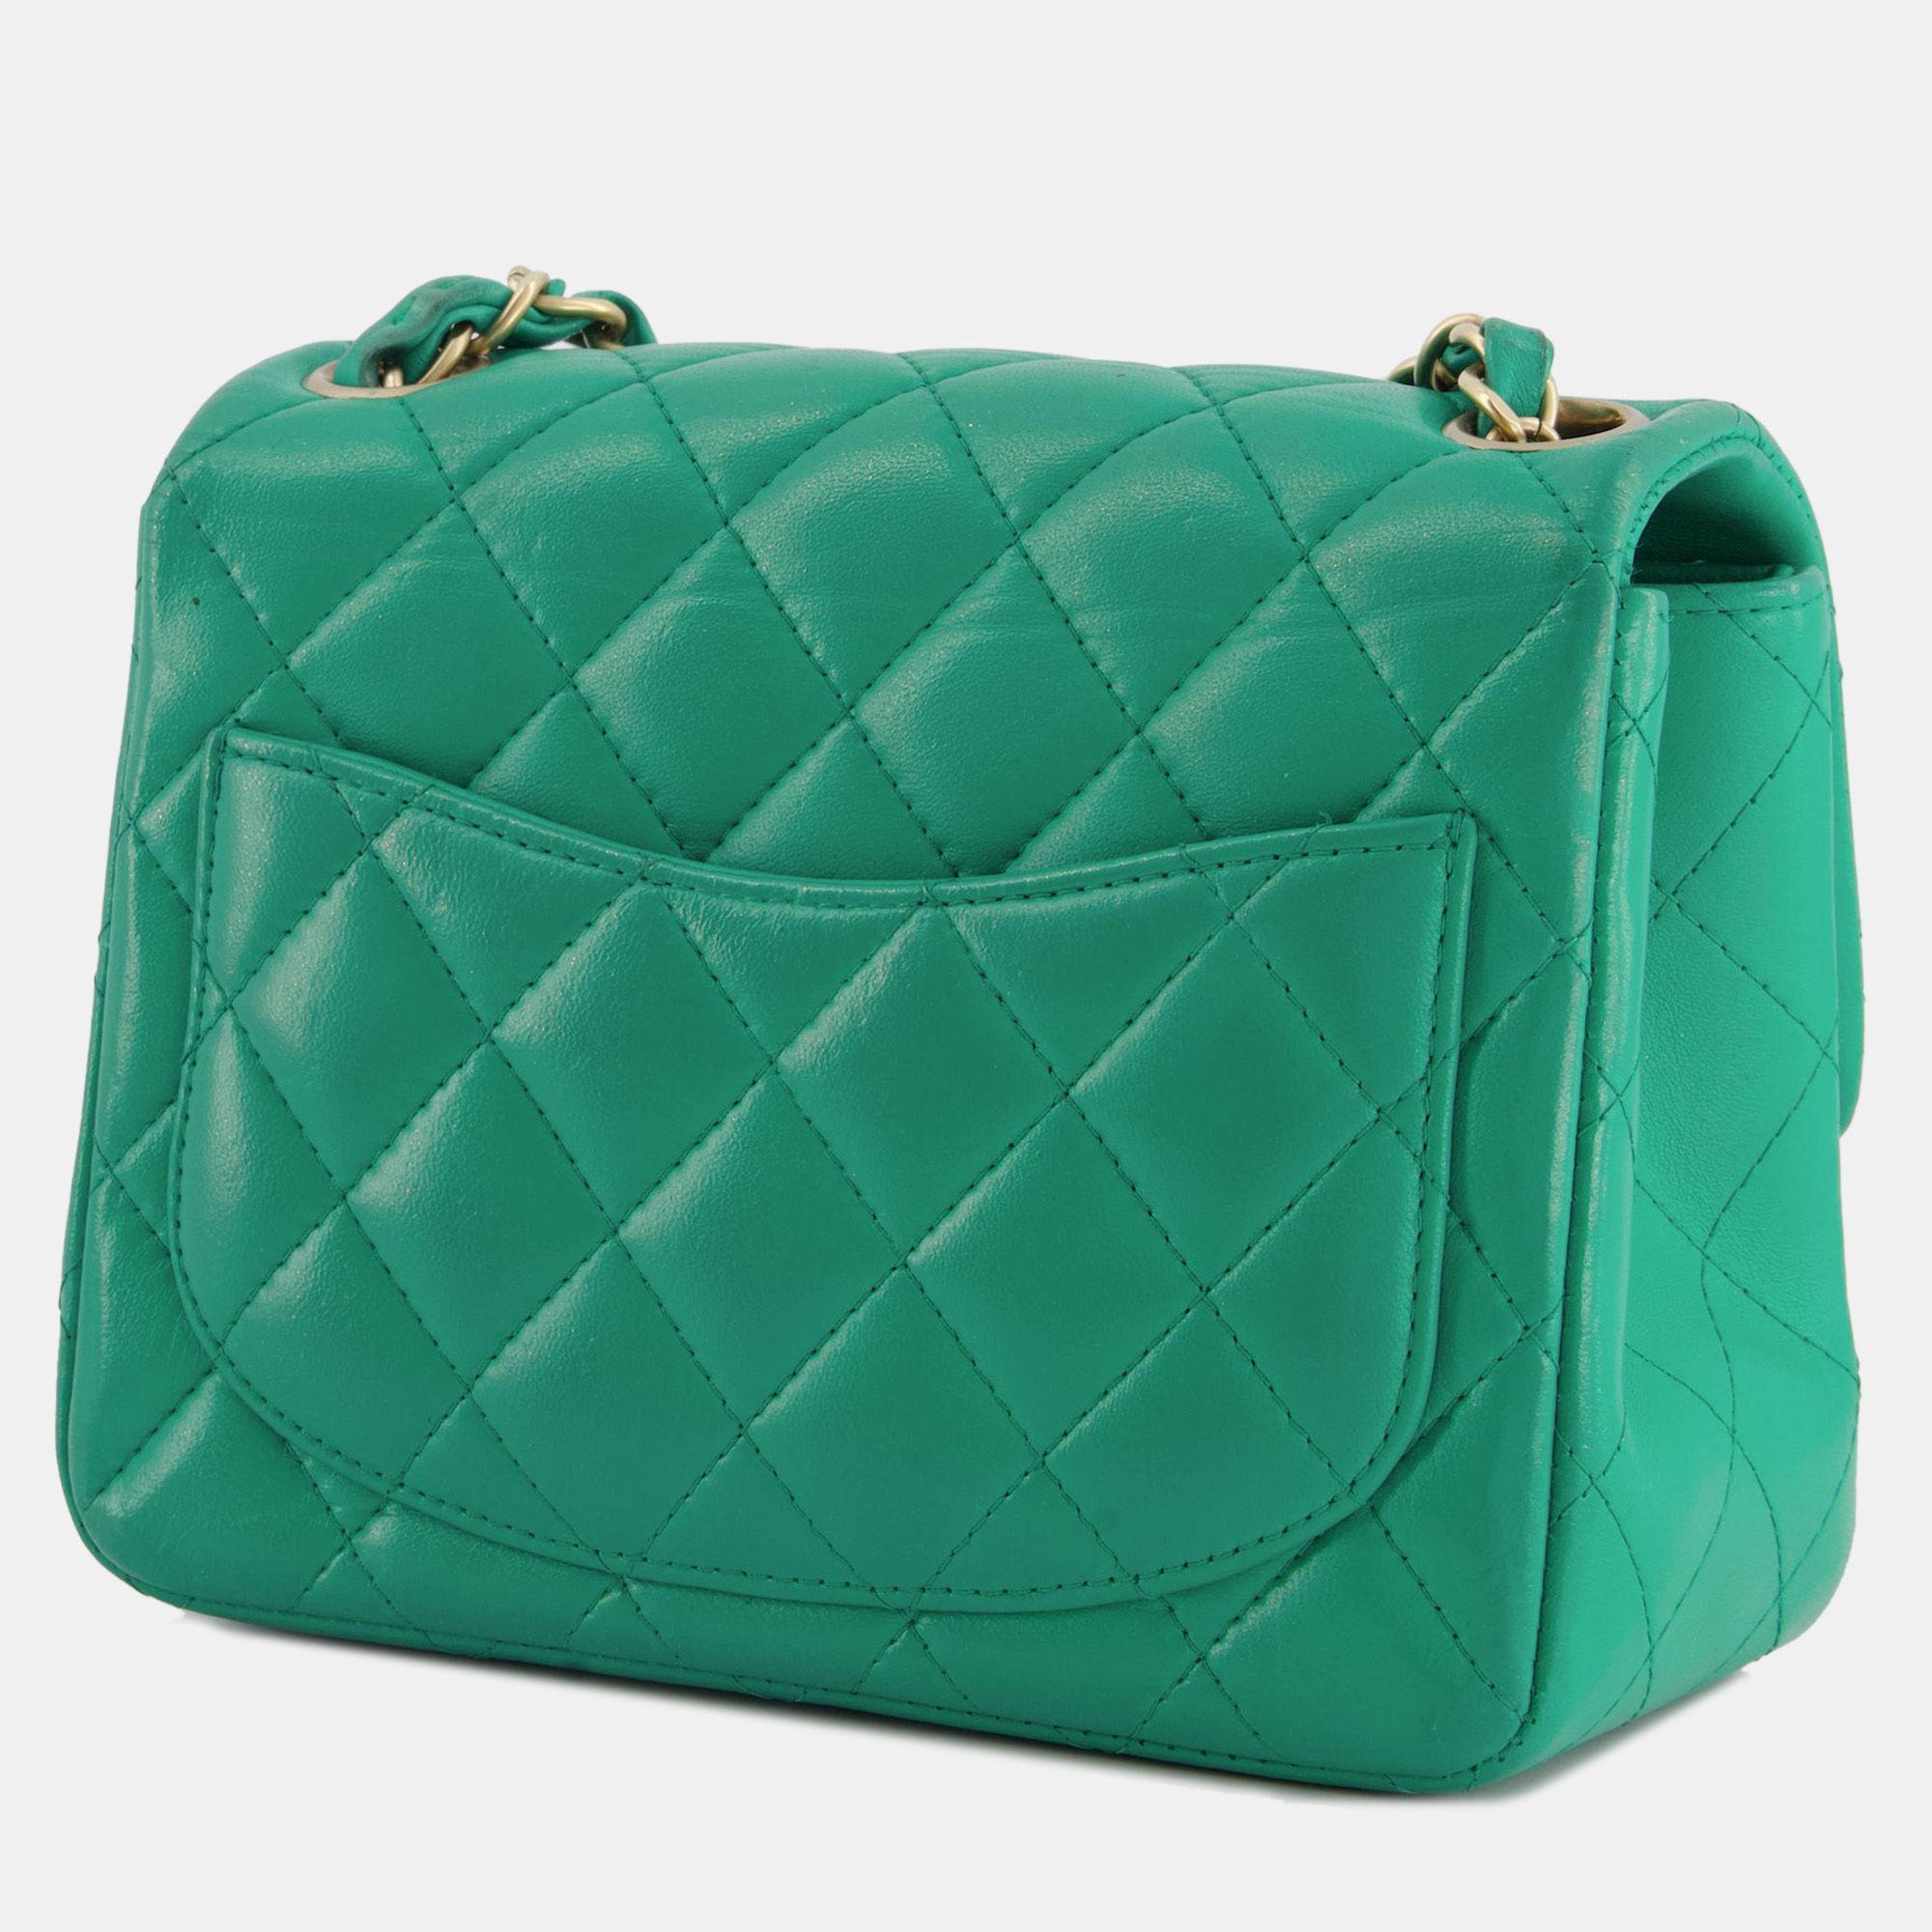 Chanel Emerald Green Mini Square Bag In Lambskin Leather With Brushed Gold Hardware